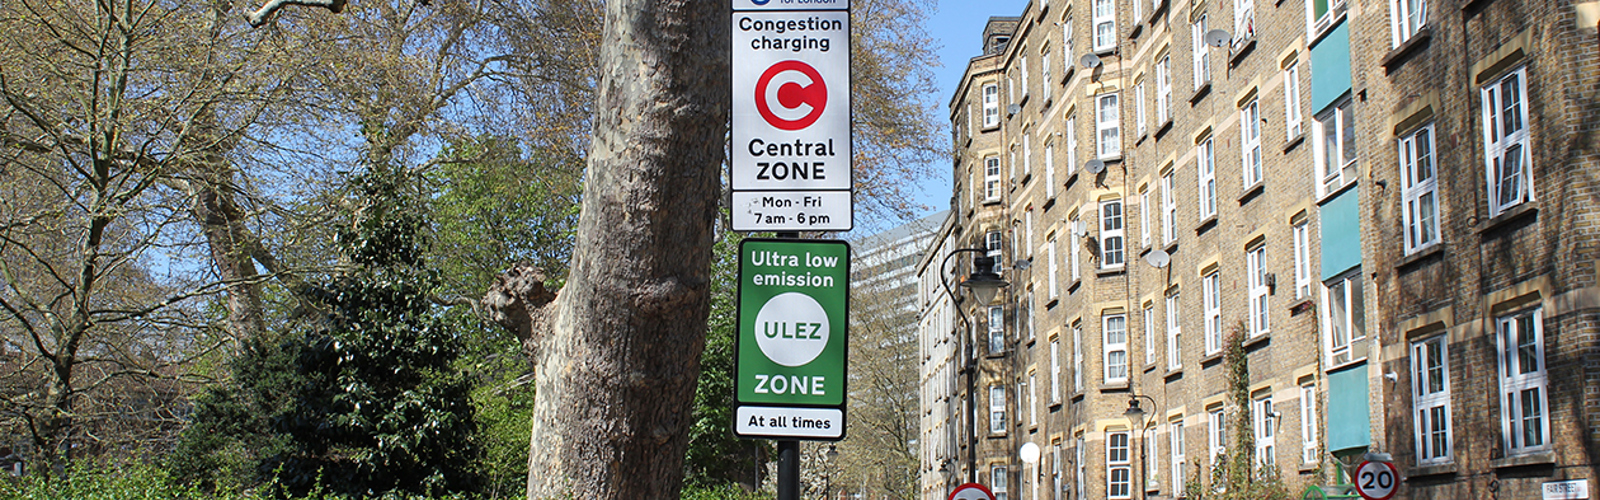 London street with congestion sign